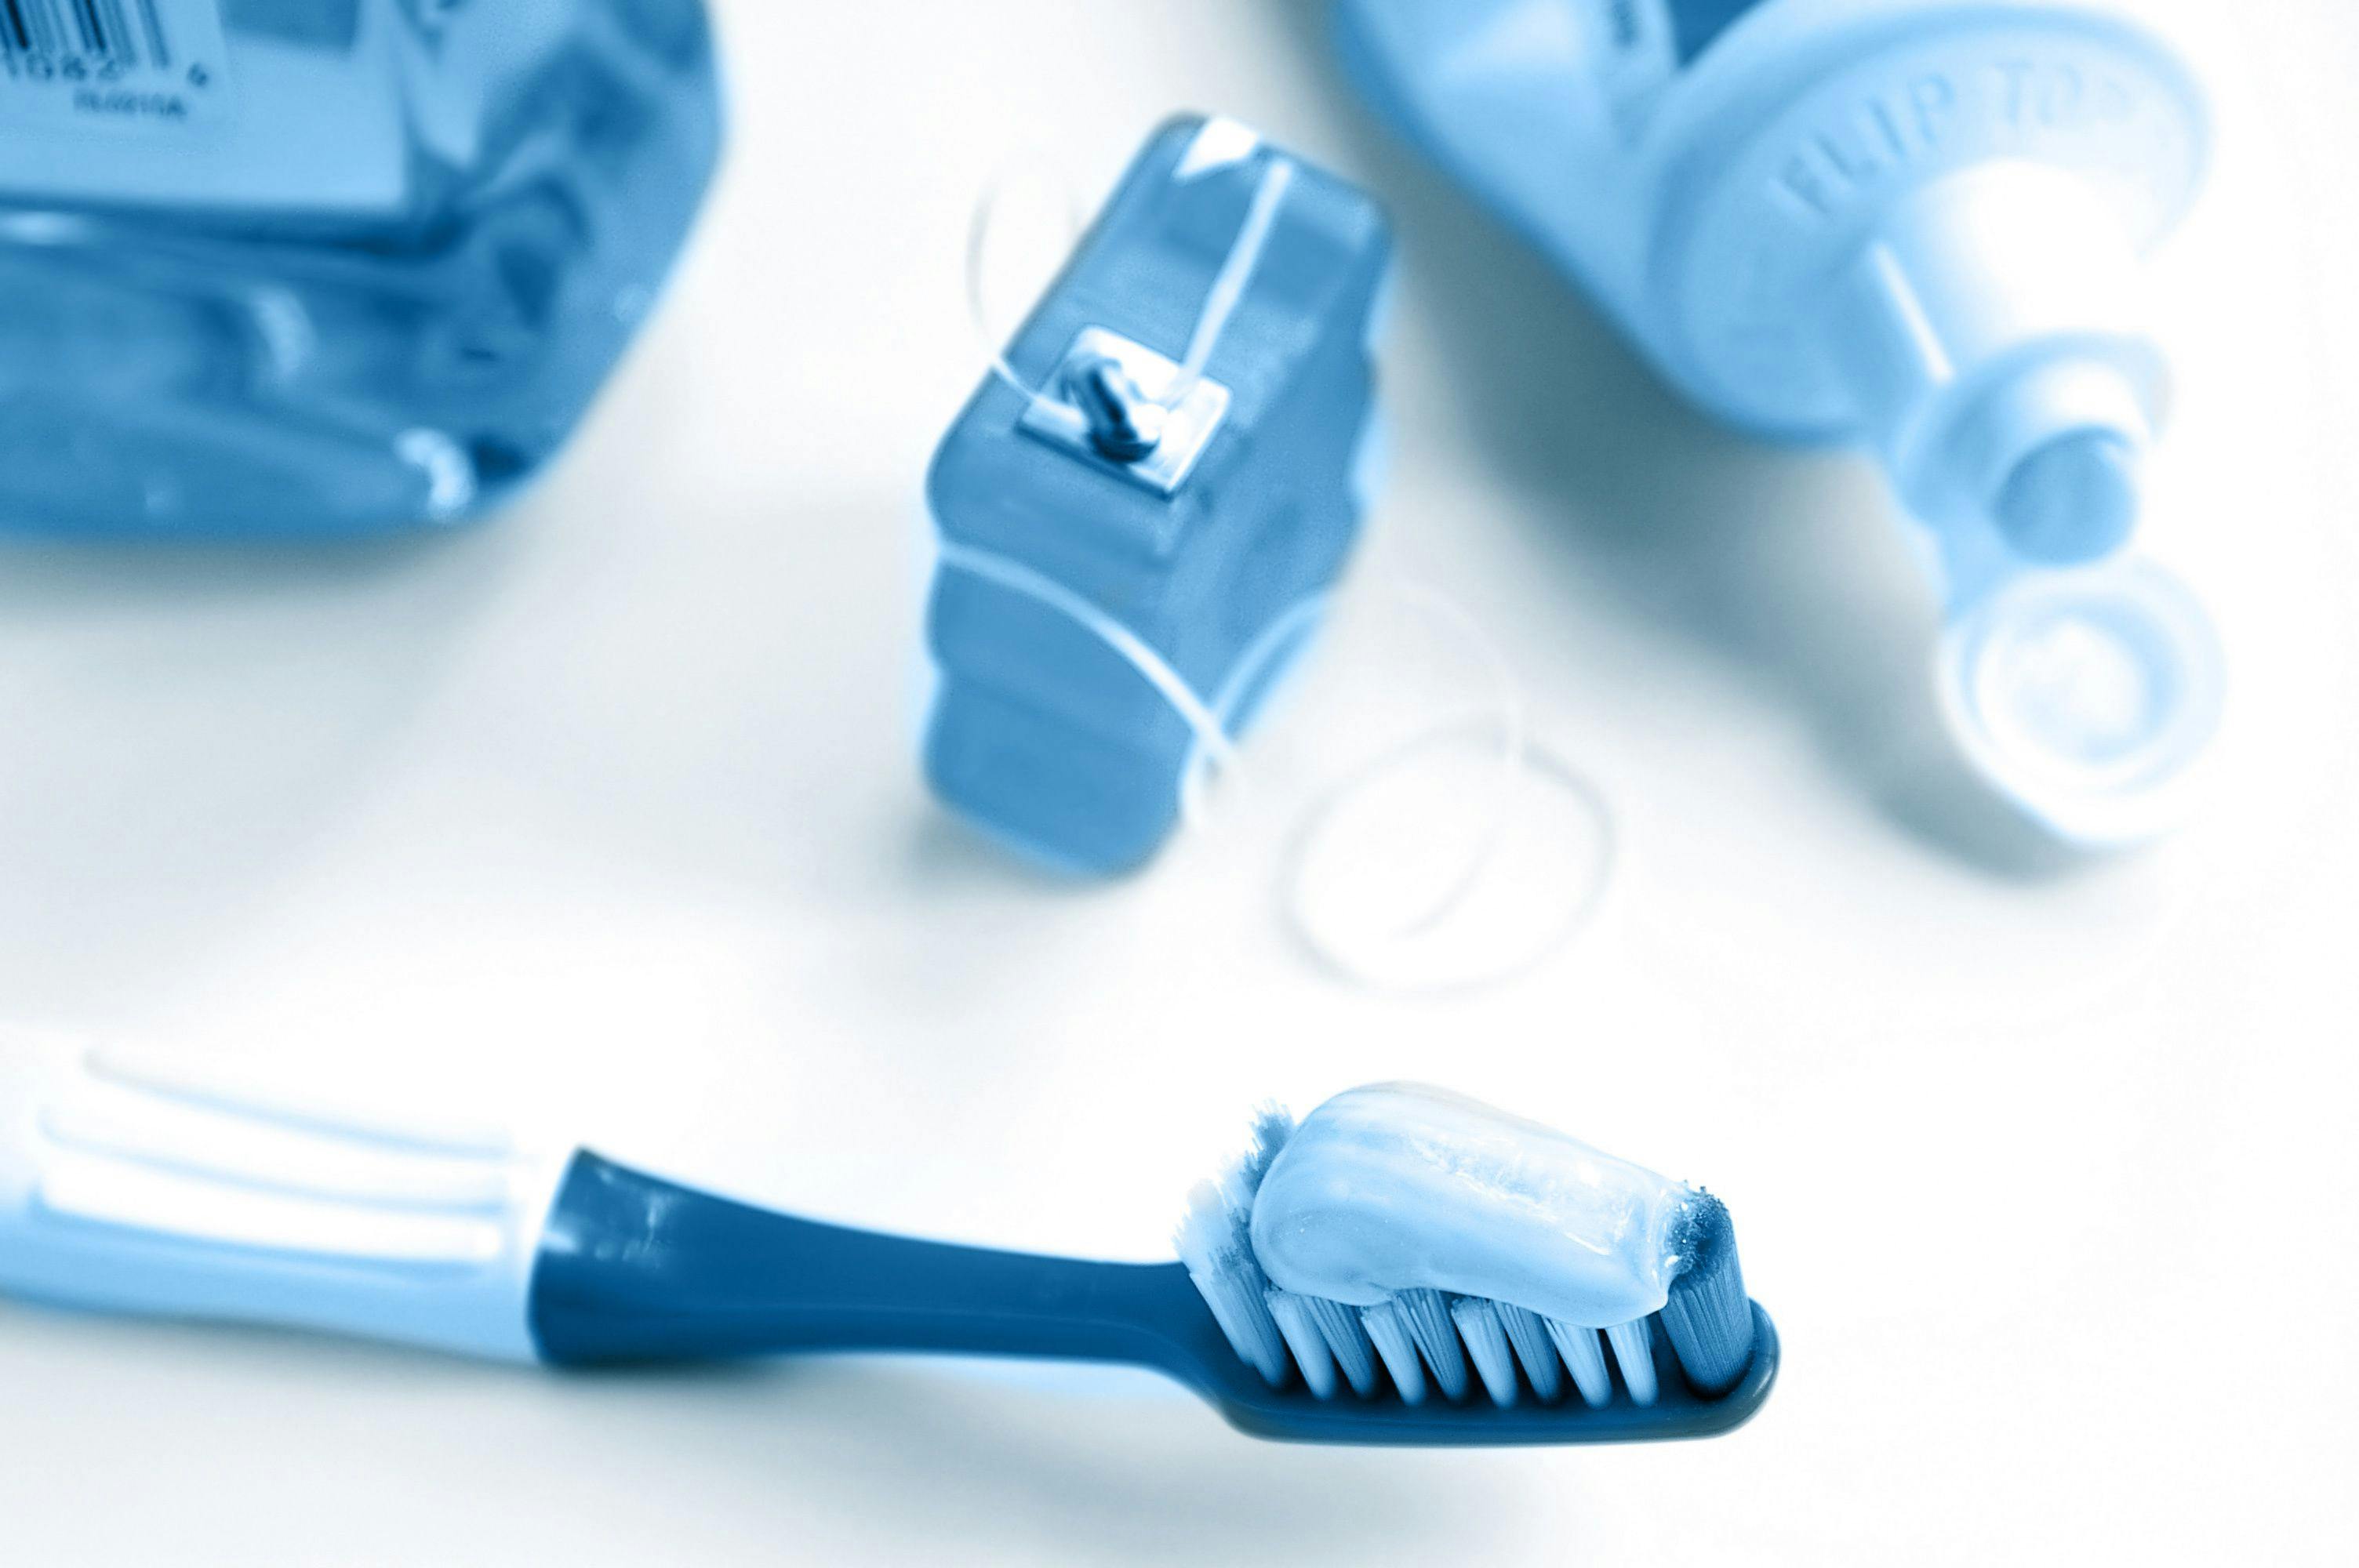 Tooth brush and floss, mouthwash and tooth paste | Image credit: Zimmytws - stock.adobe.com